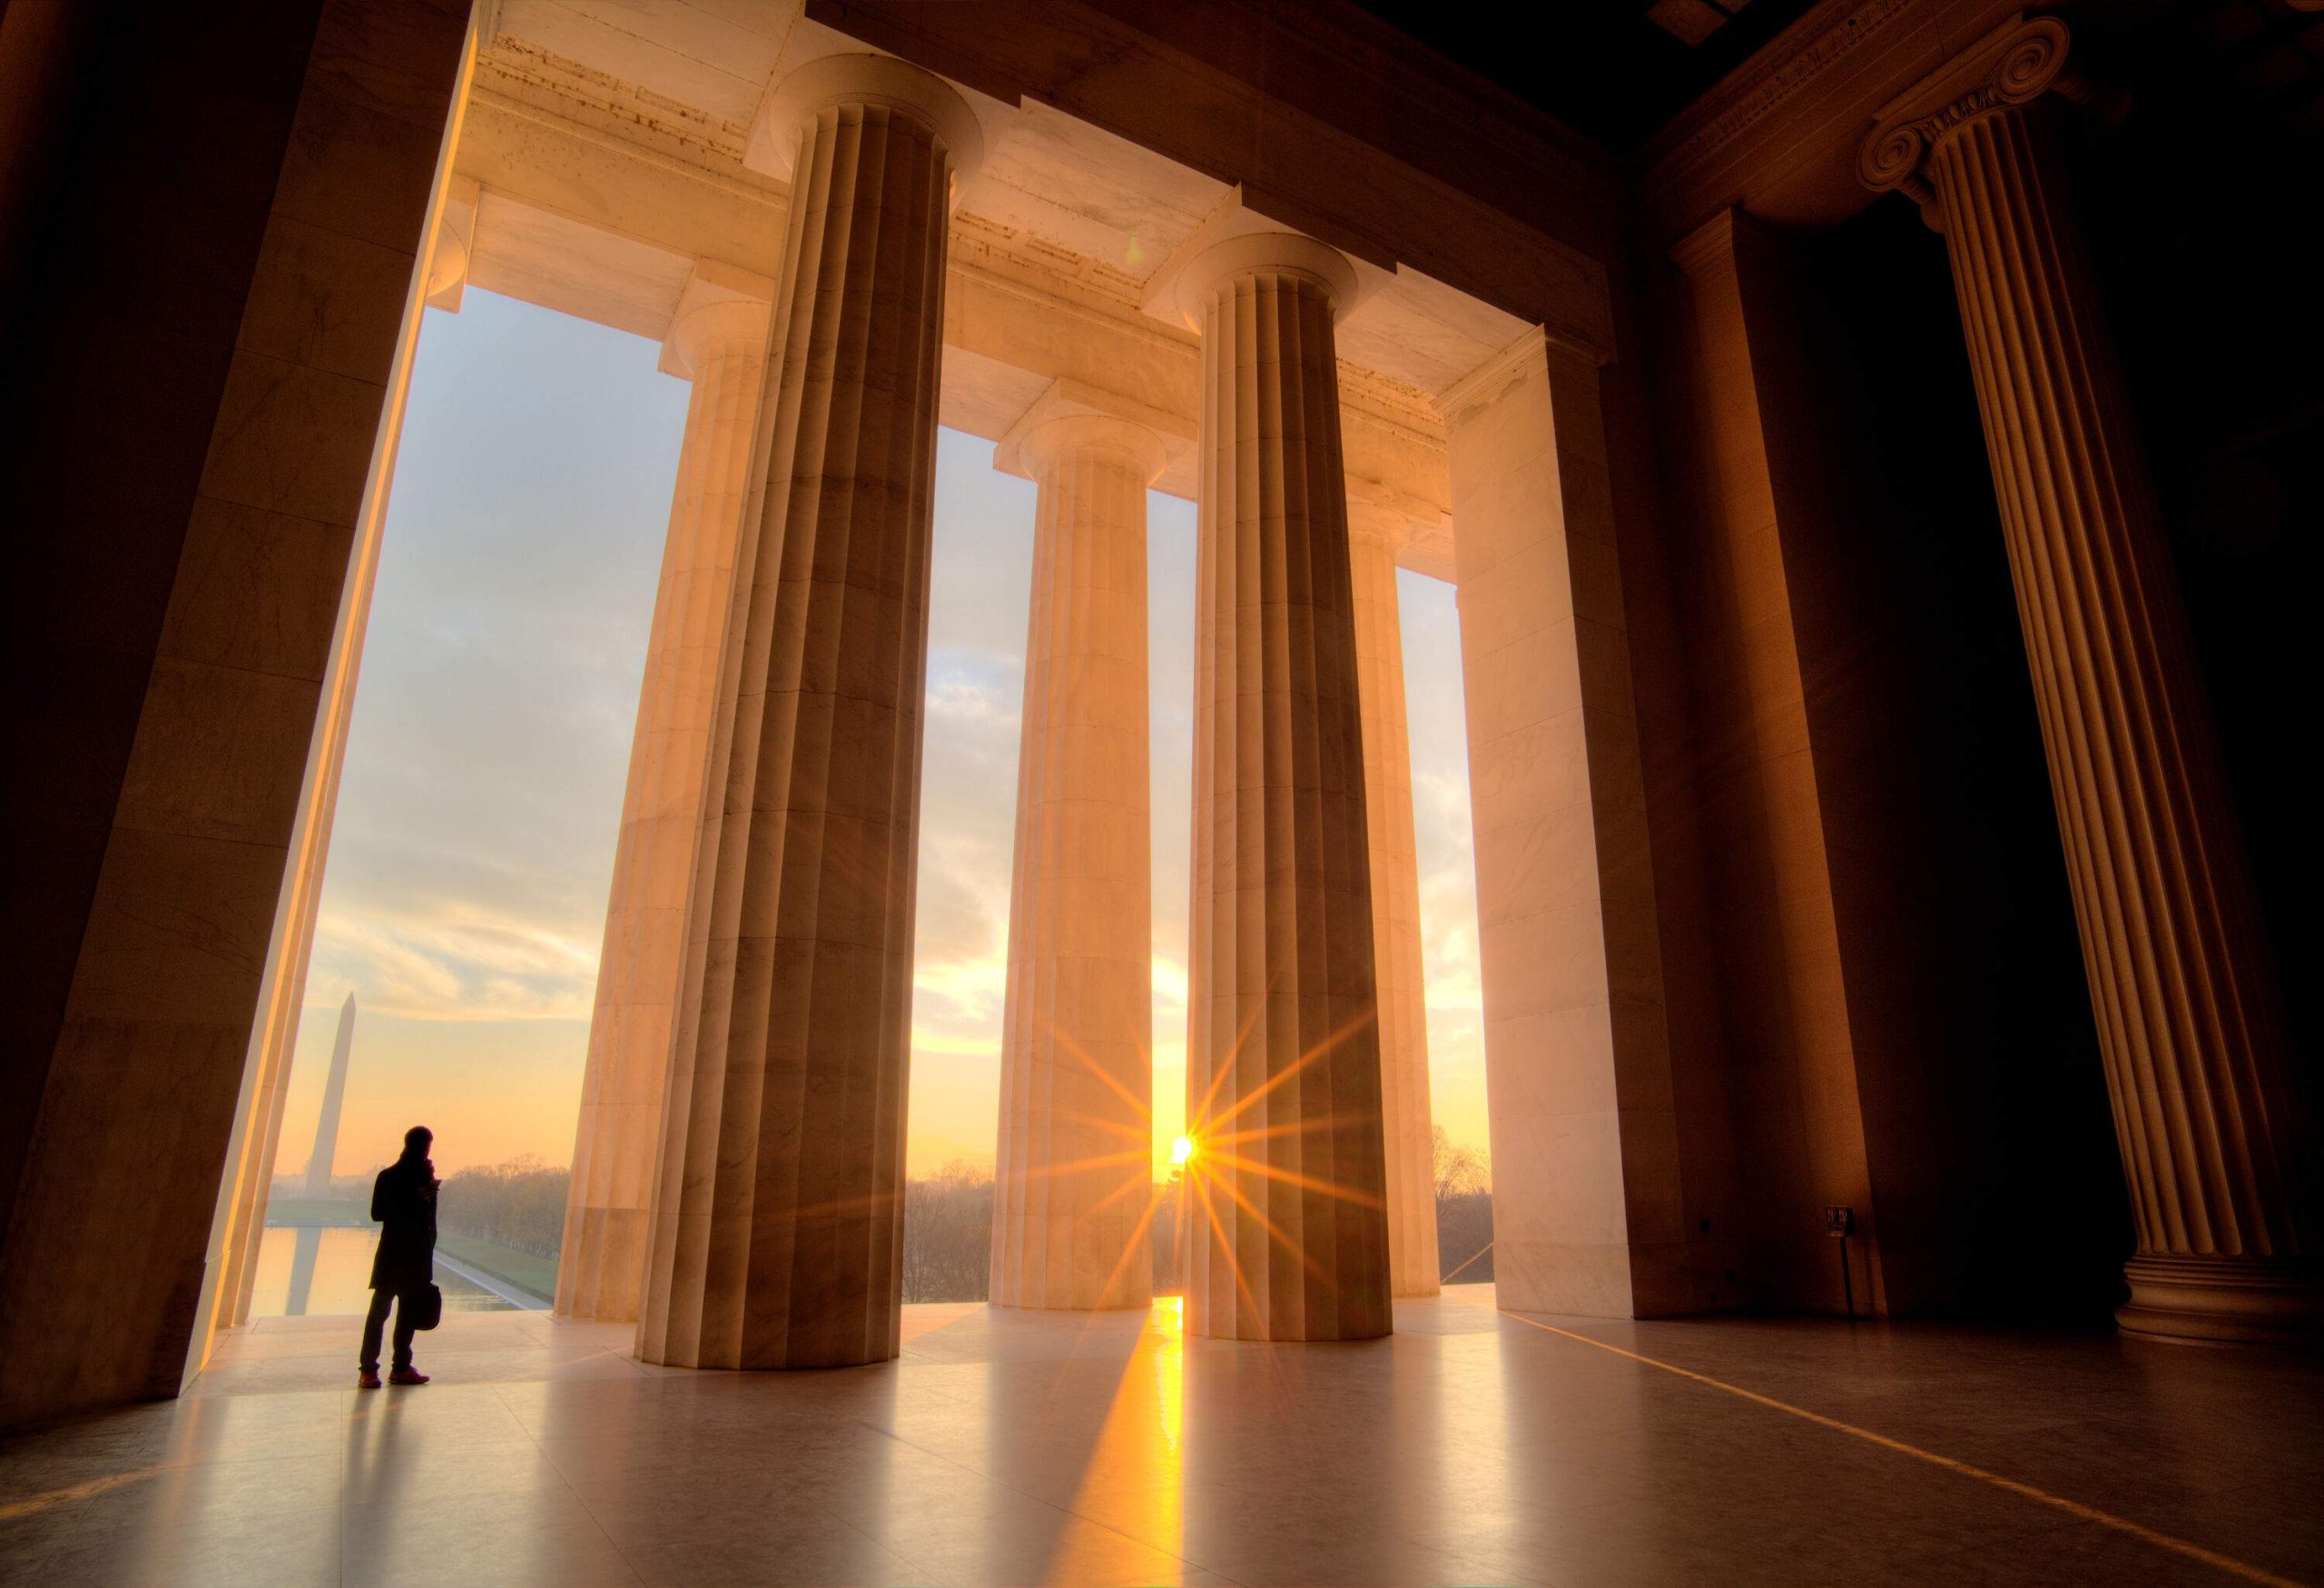 The sun's rays peeked behind the tall Doric-style columns with a lone man standing.